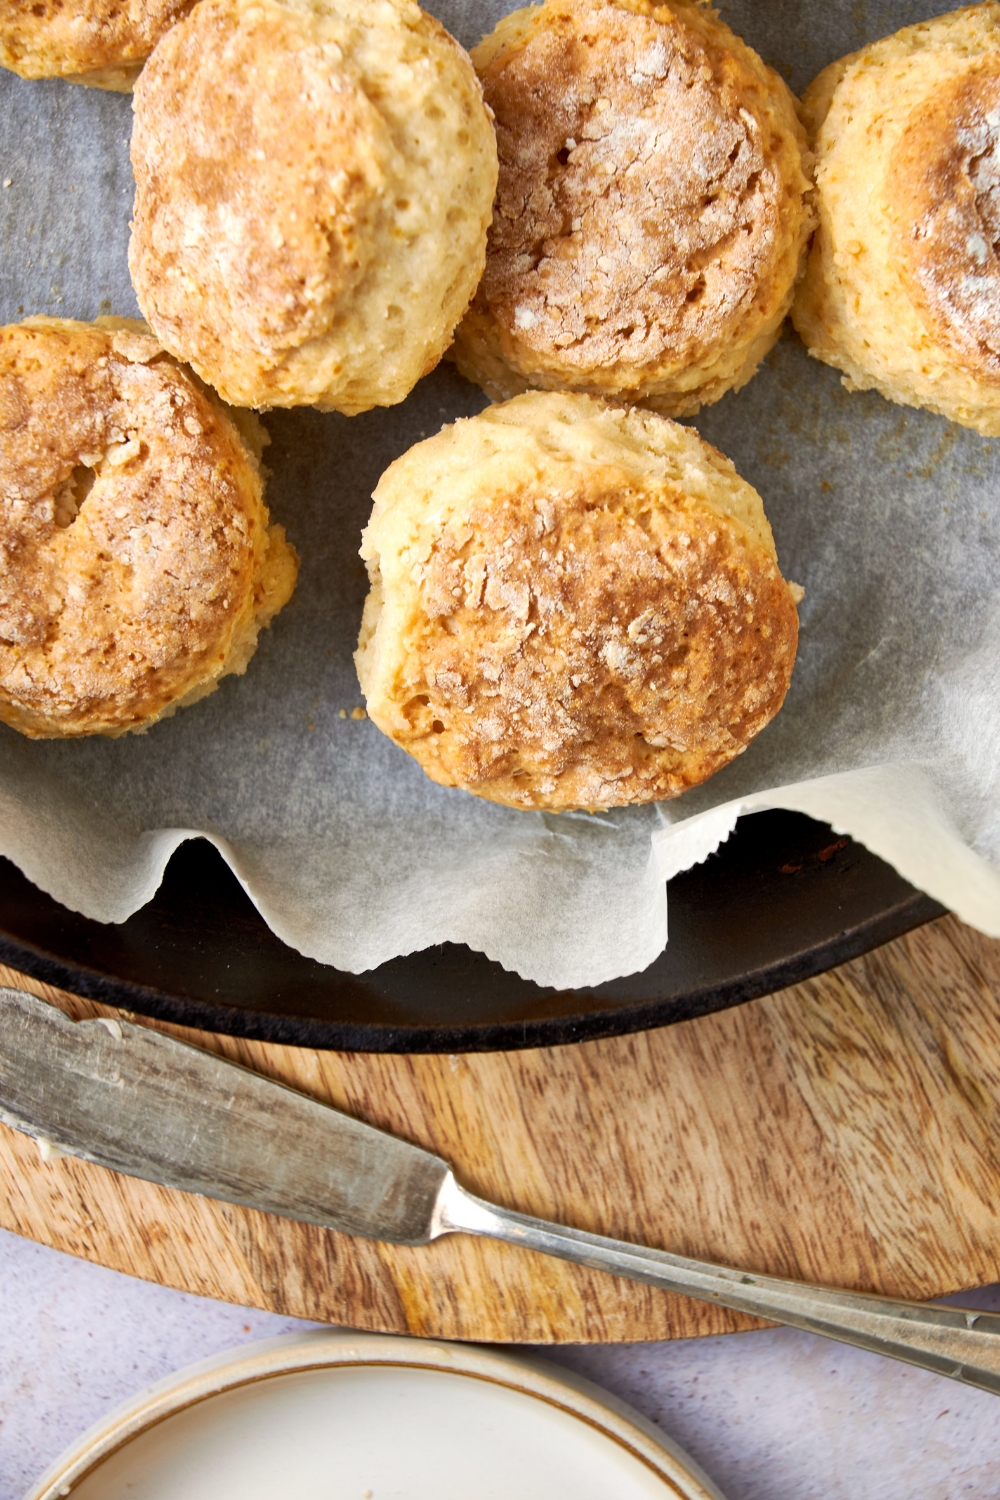 Golden brown cathead biscuits in a parchment paper lined pan with a serving knife on a wooden board nearby.